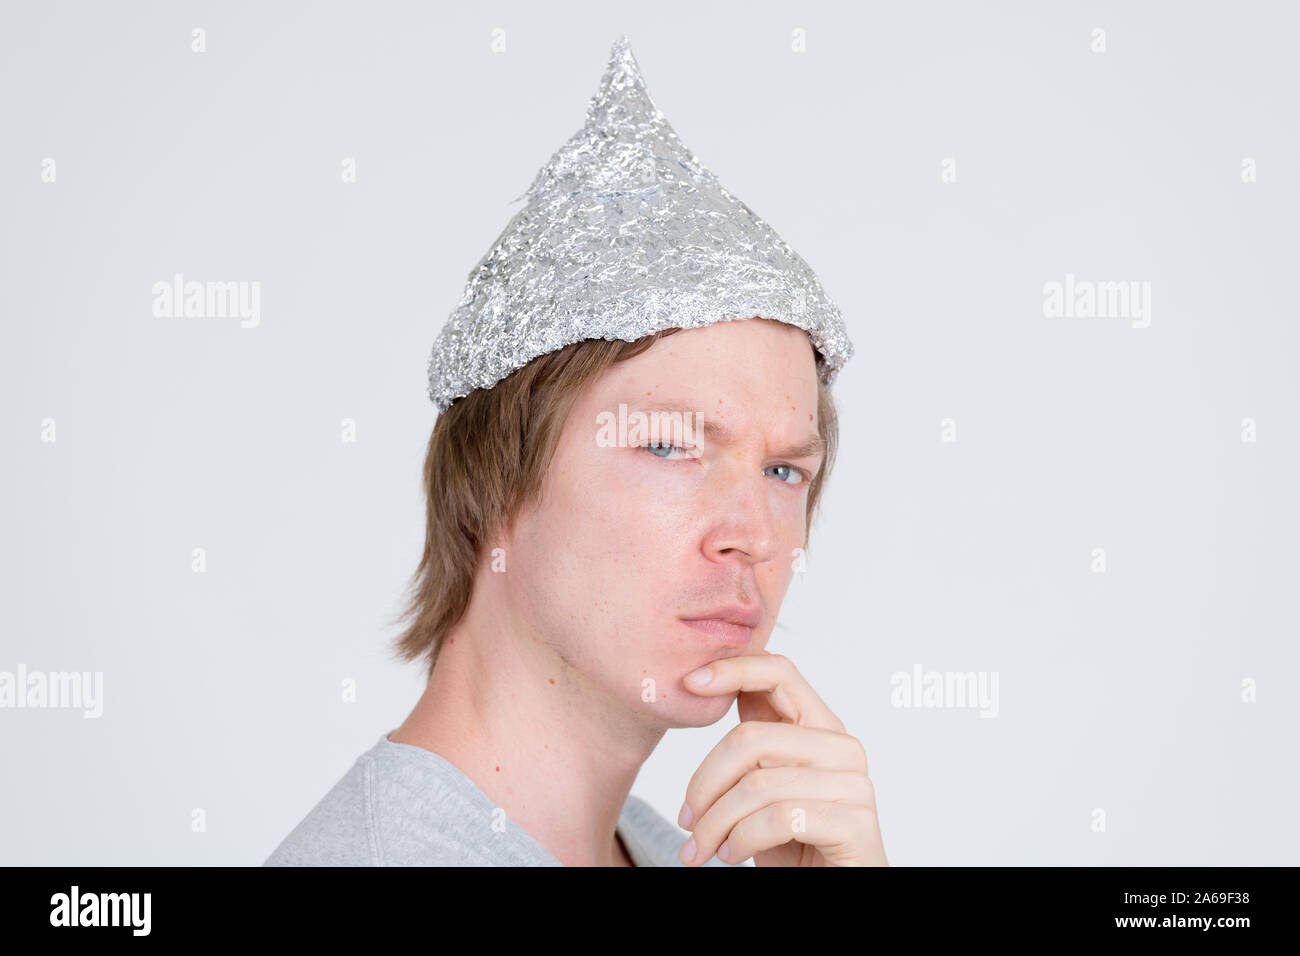 closeup-profile-view-of-young-man-with-tinfoil-hat-thinking-and-looking-at-camera-2A69F38.jpg